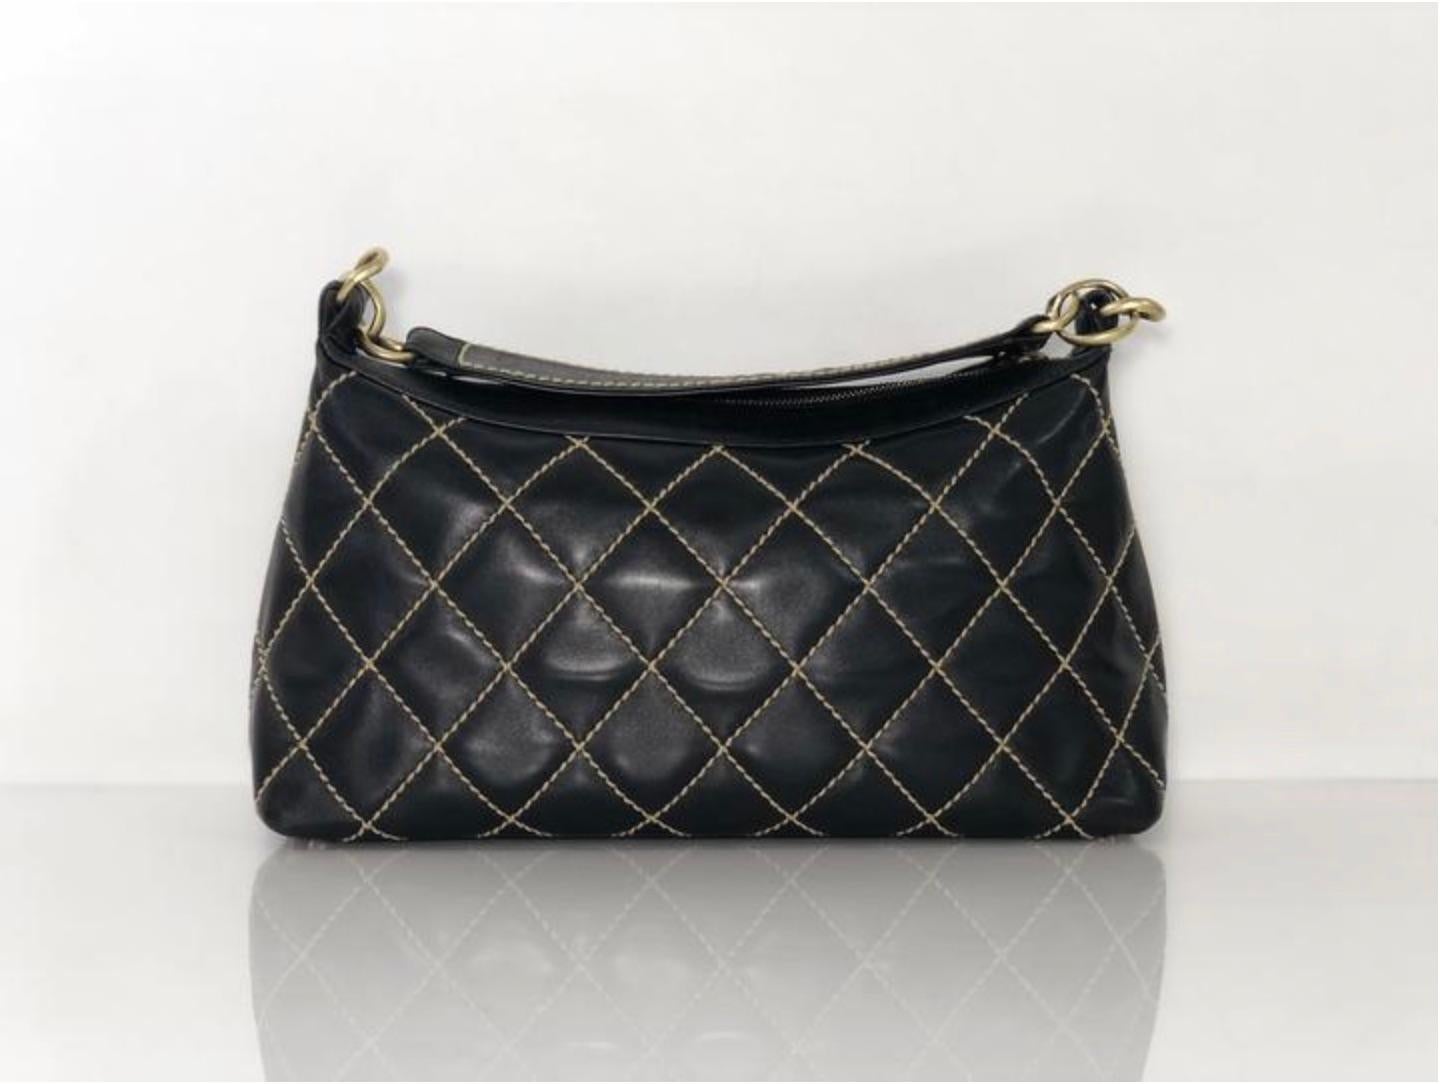 Chanel Lambskin Leather Wild Stitch Large Shoulder with Gold Hardware in Black For Sale 1